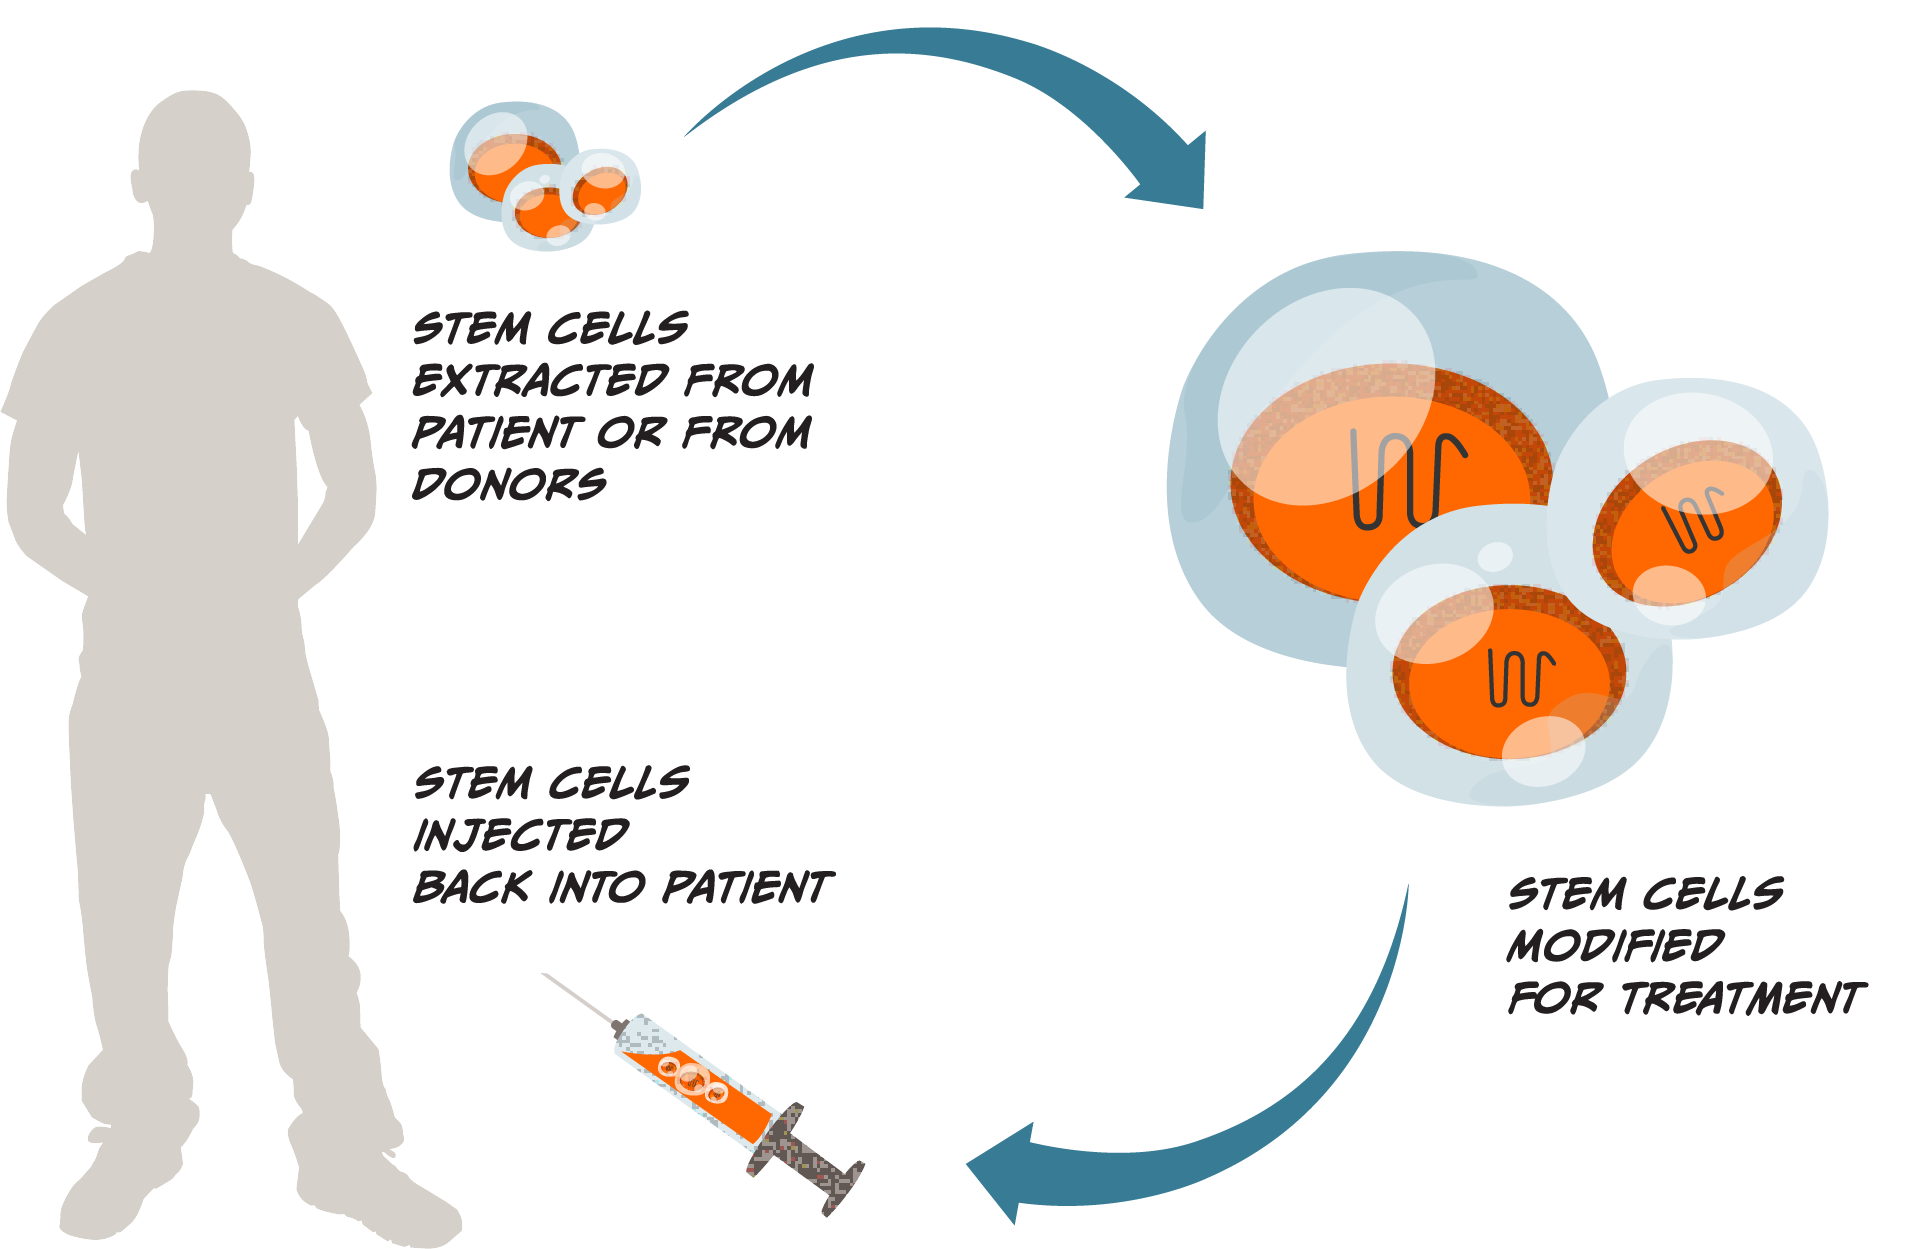 Illustrative diagram showing three steps for how cell therapy works. One, stem cells are extracted from a patient or donor, the cells and patient are illustrated with an arrow pointing to the next step. Two, stem cells are modified for treatment, a larger cluster of stem cells are illustrated, with an arrow pointing to the final step. Three, stem cells are injected back into the patient, with a syringe illustrated near the illustration of the patient.